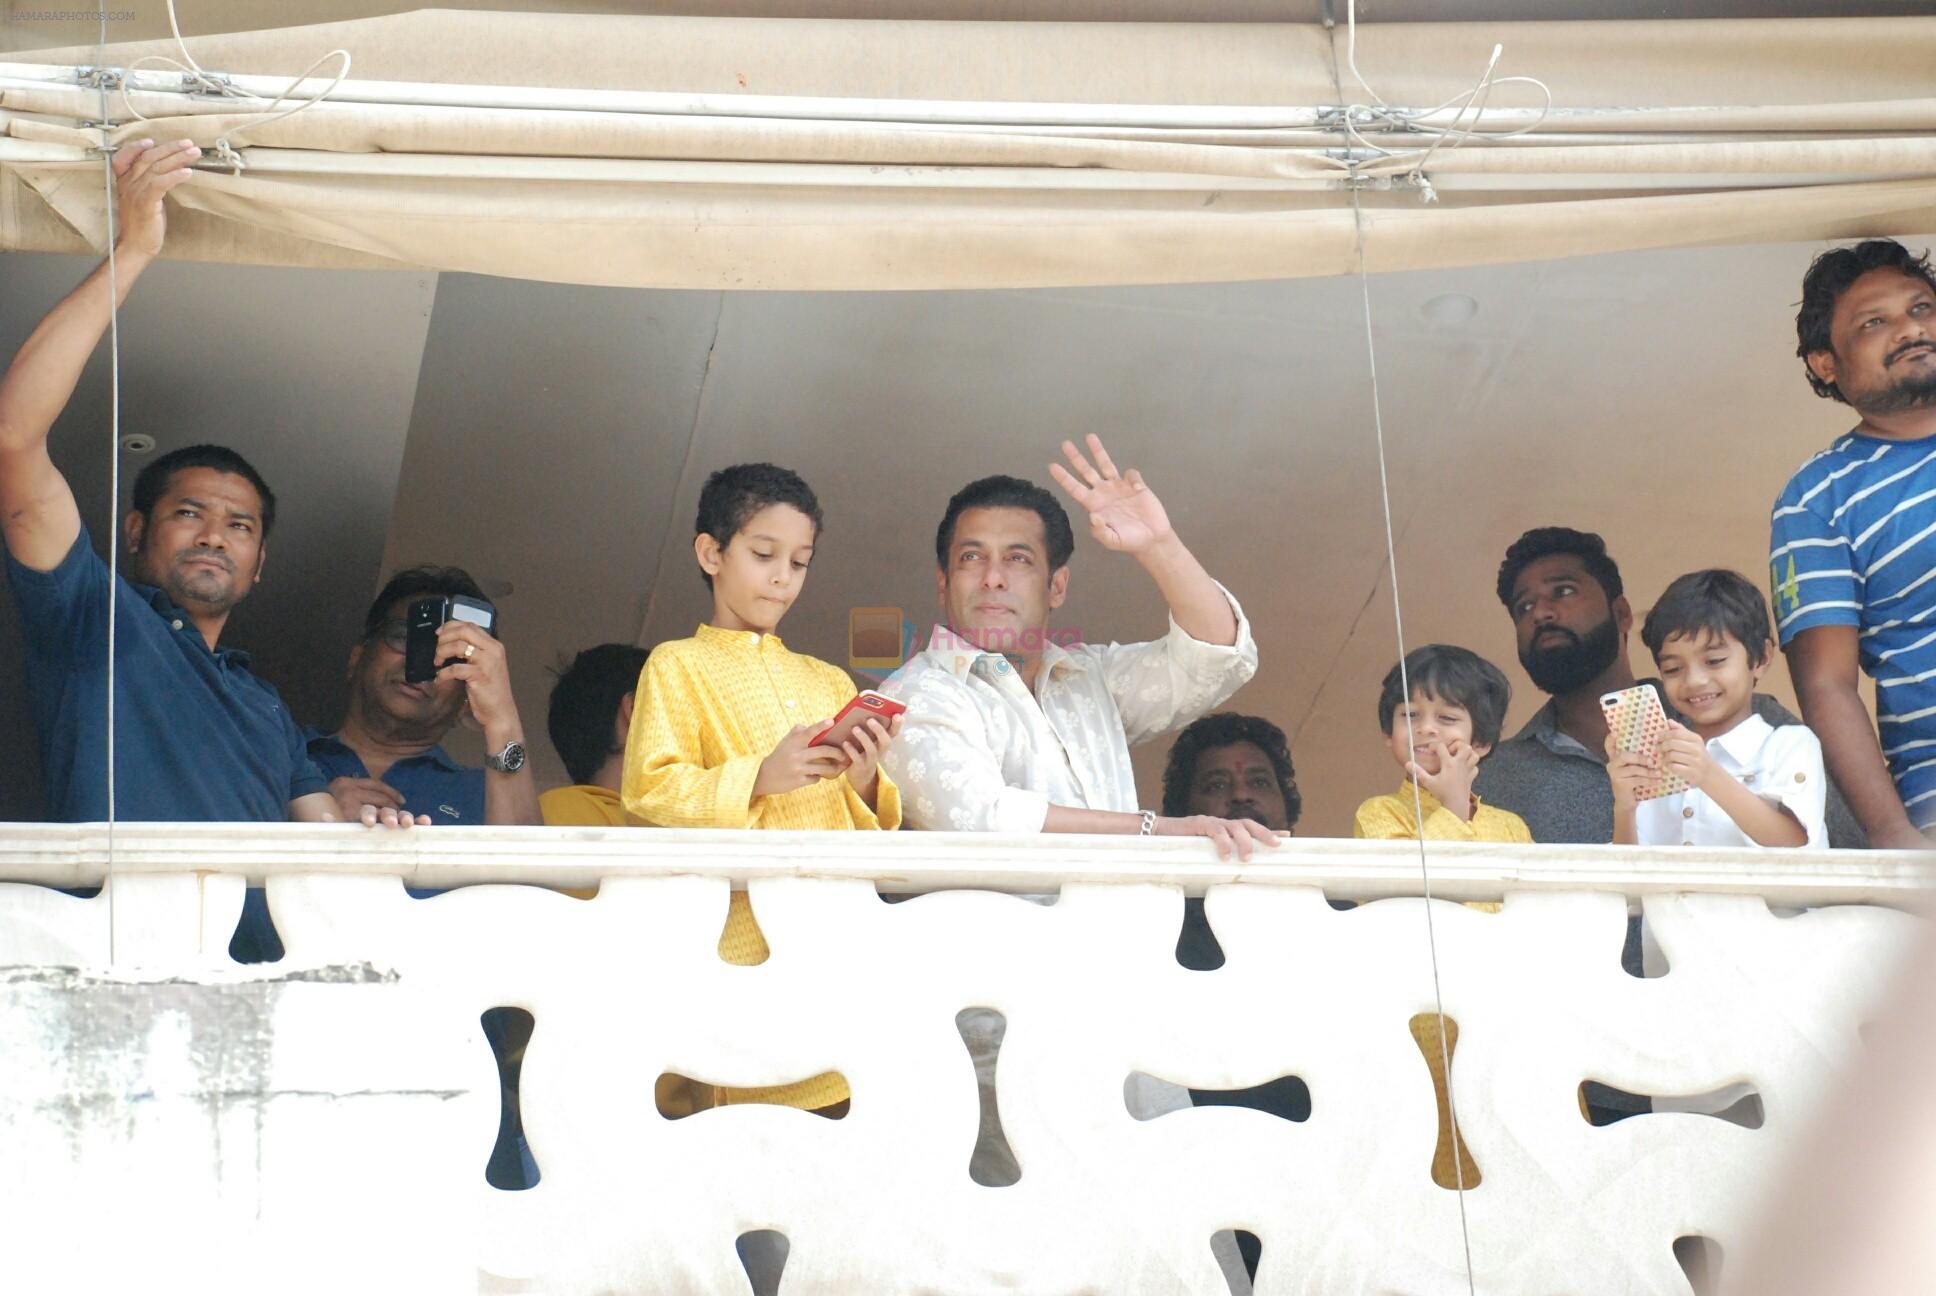 Salman khan waves to the fans on Eid from his home in bandra on 16th June 2018